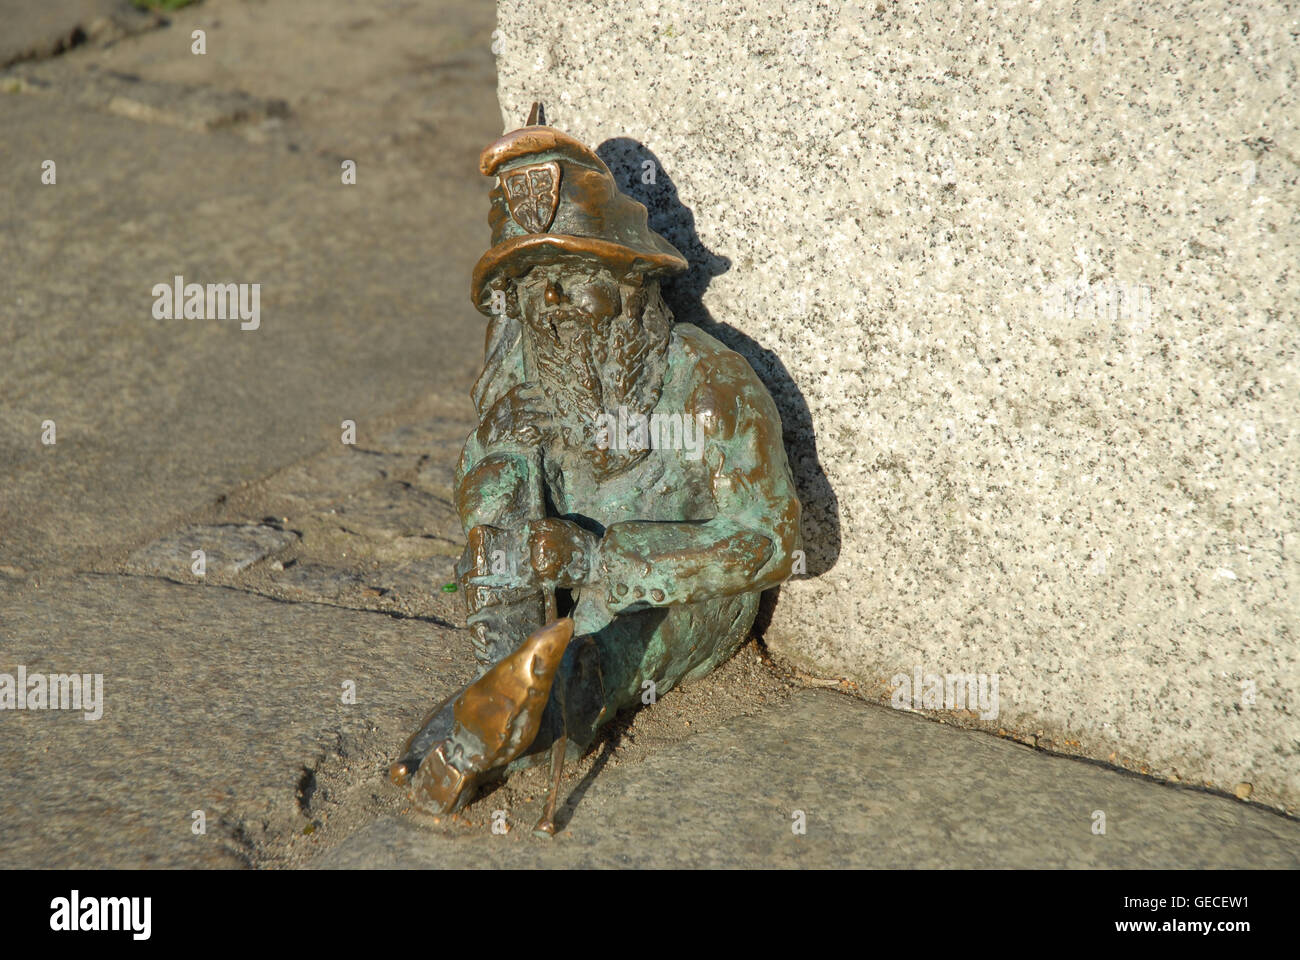 One of Wrocław’s most popular and iconic attractions - a dwarf - unlikely symbol of one of Poland's most picturesque cities. Stock Photo